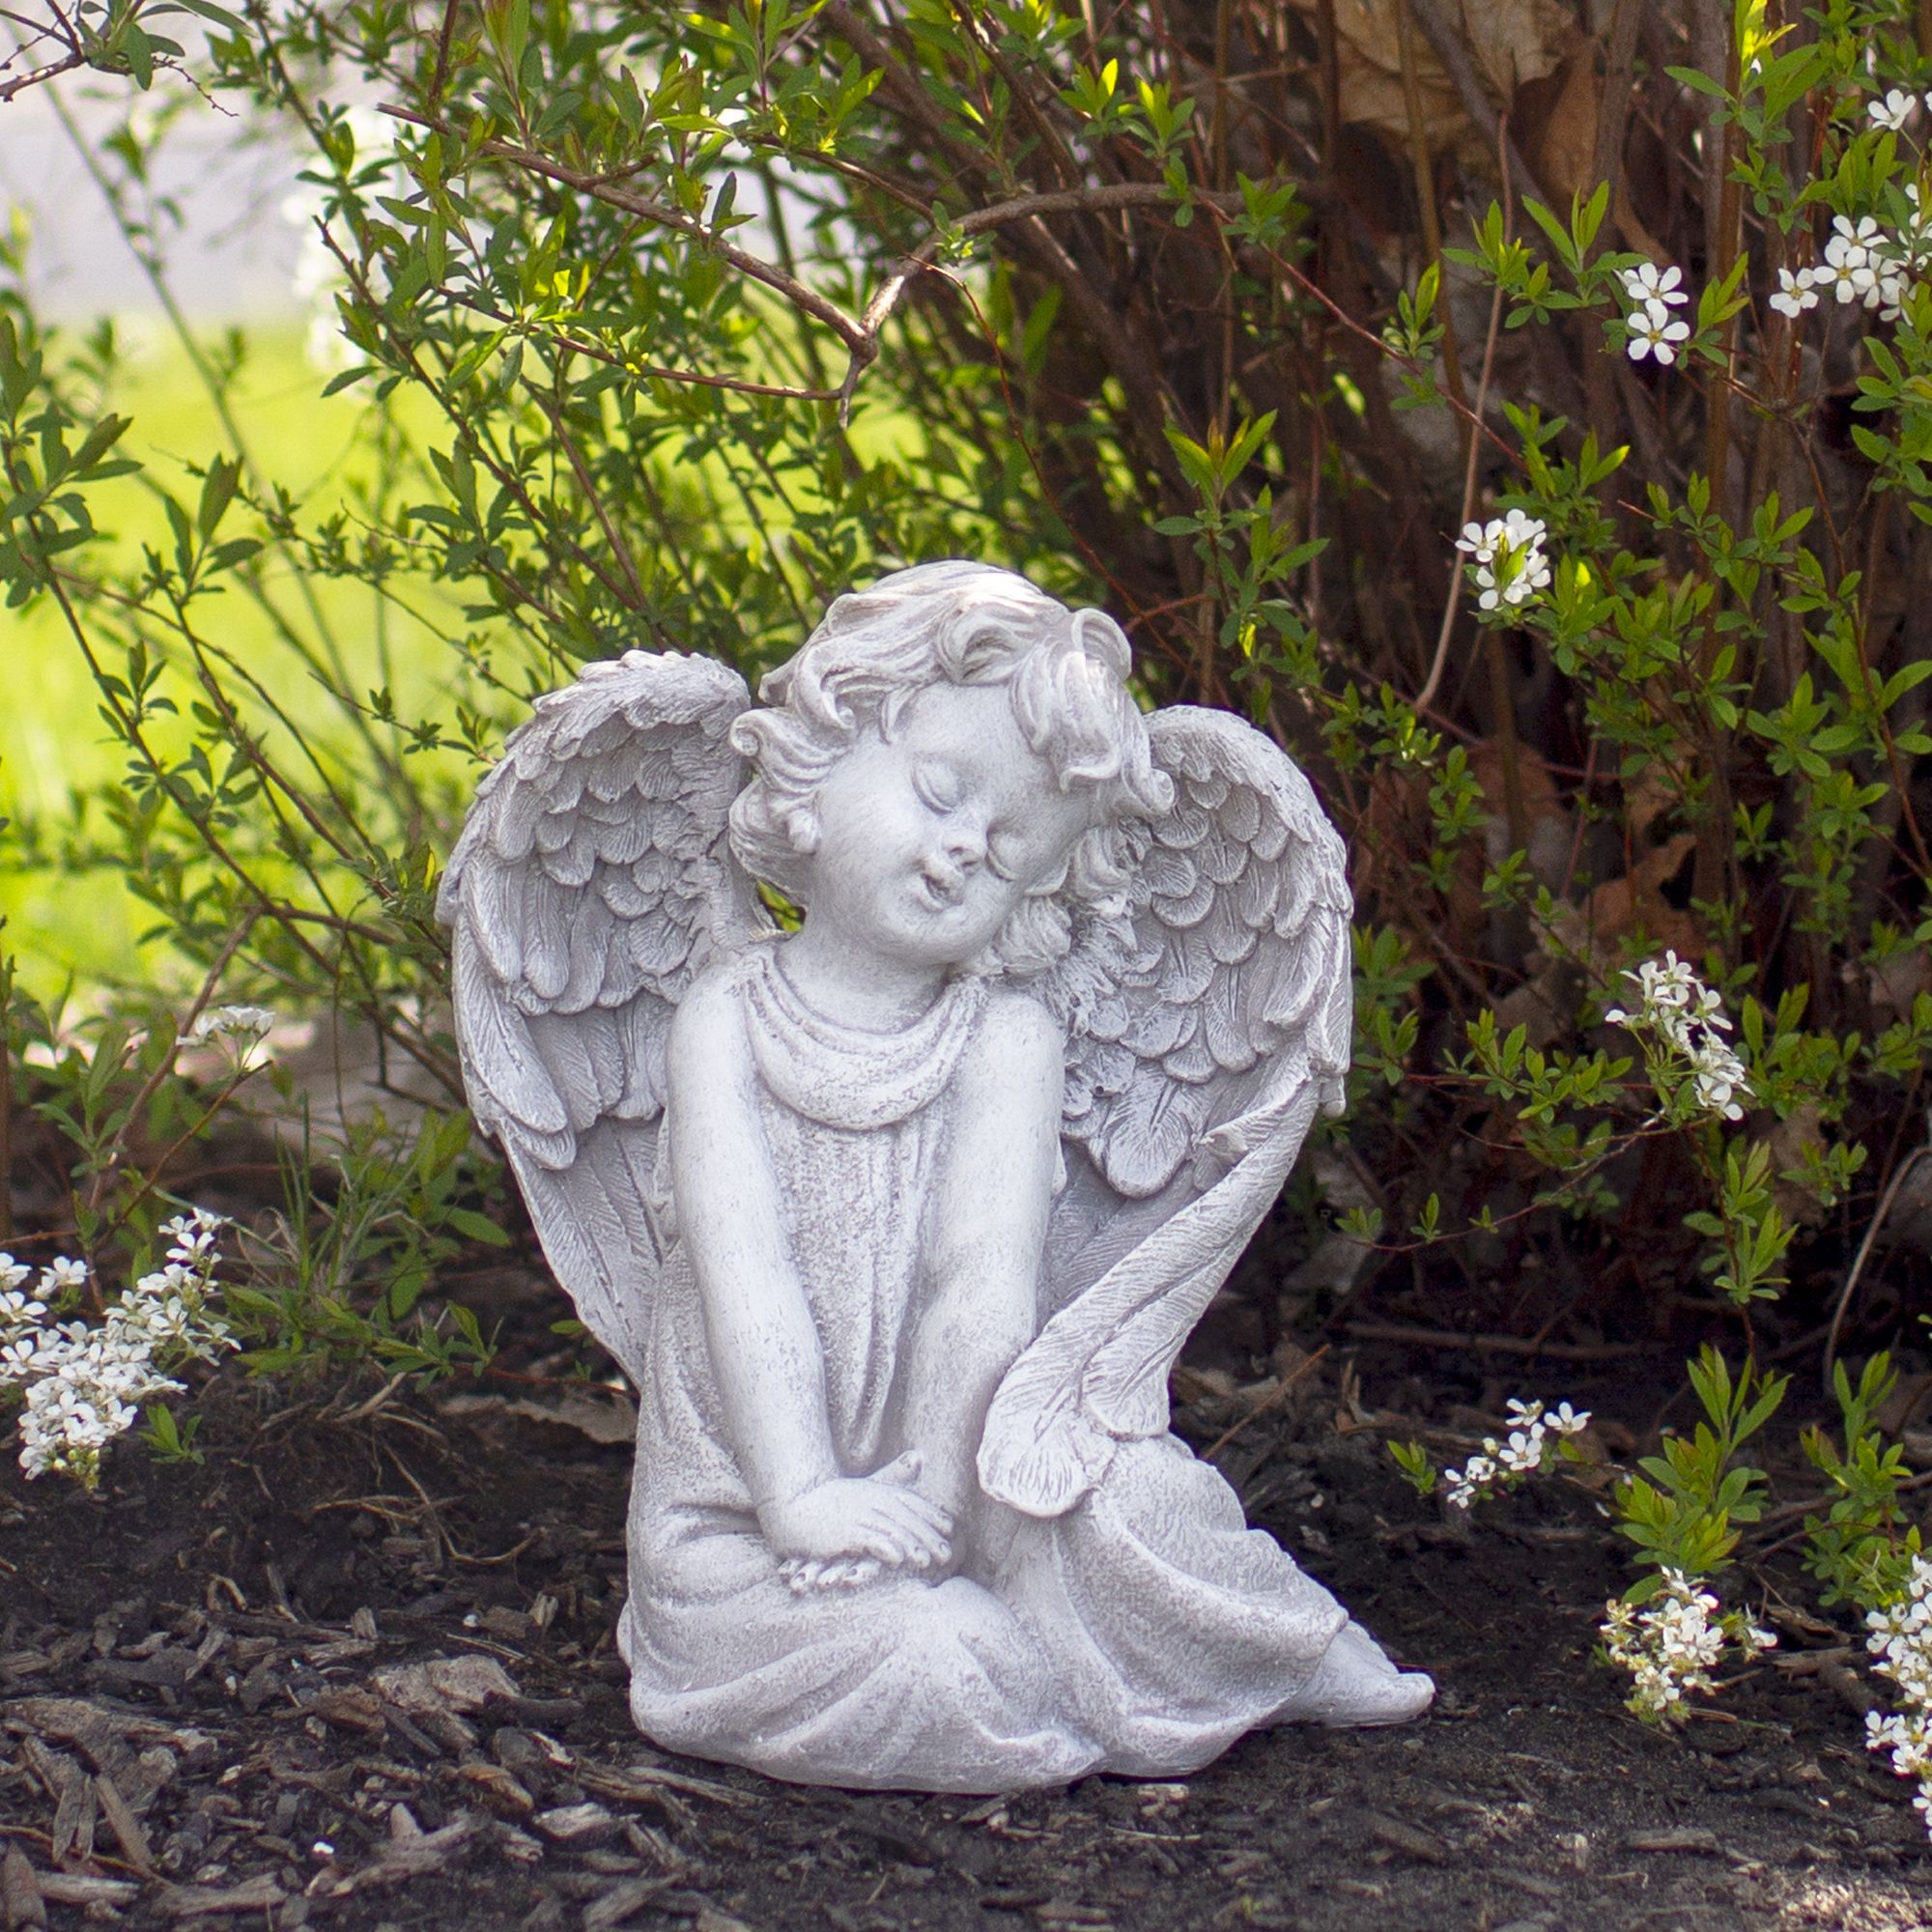 Northlight 8.75" Gray Sitting  Angel with Wings Outdoor Garden Statue - image 2 of 5